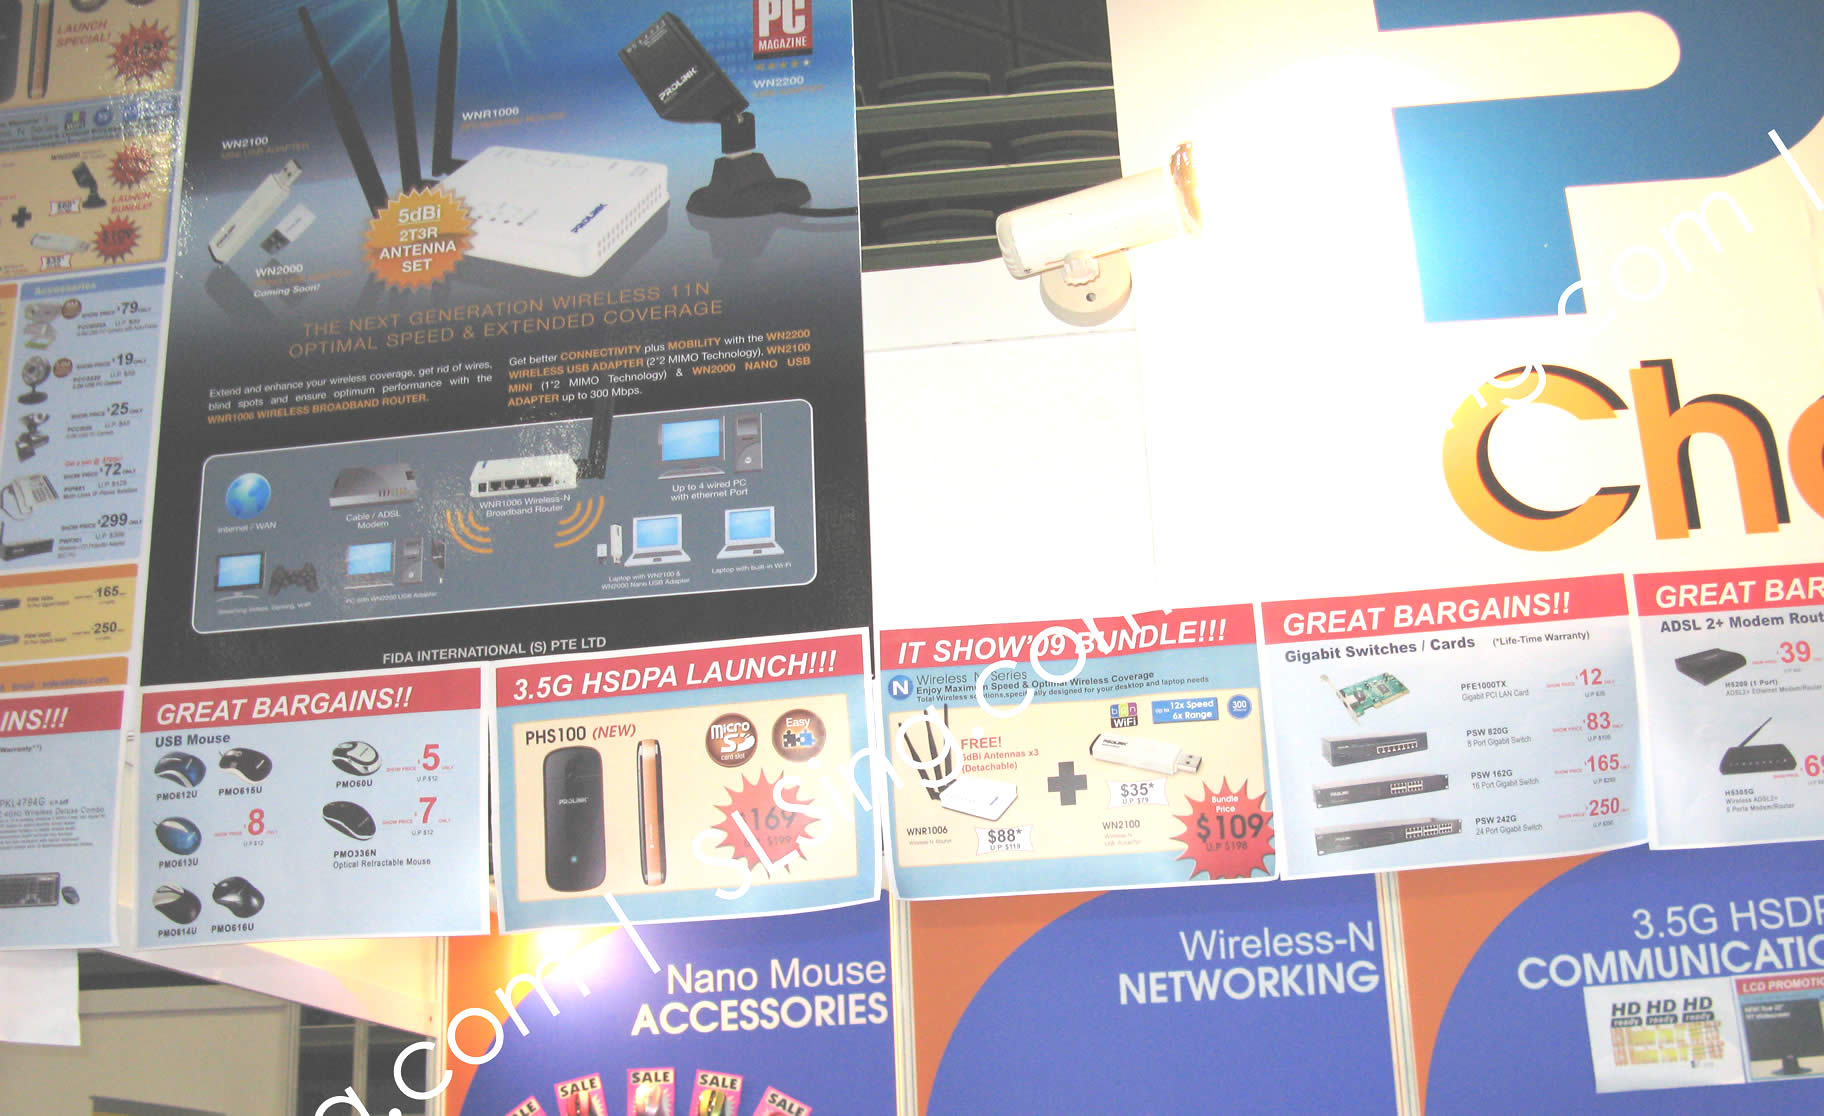 IT Show 2009 price list image brochure of Prolink (vr-zone Booest)